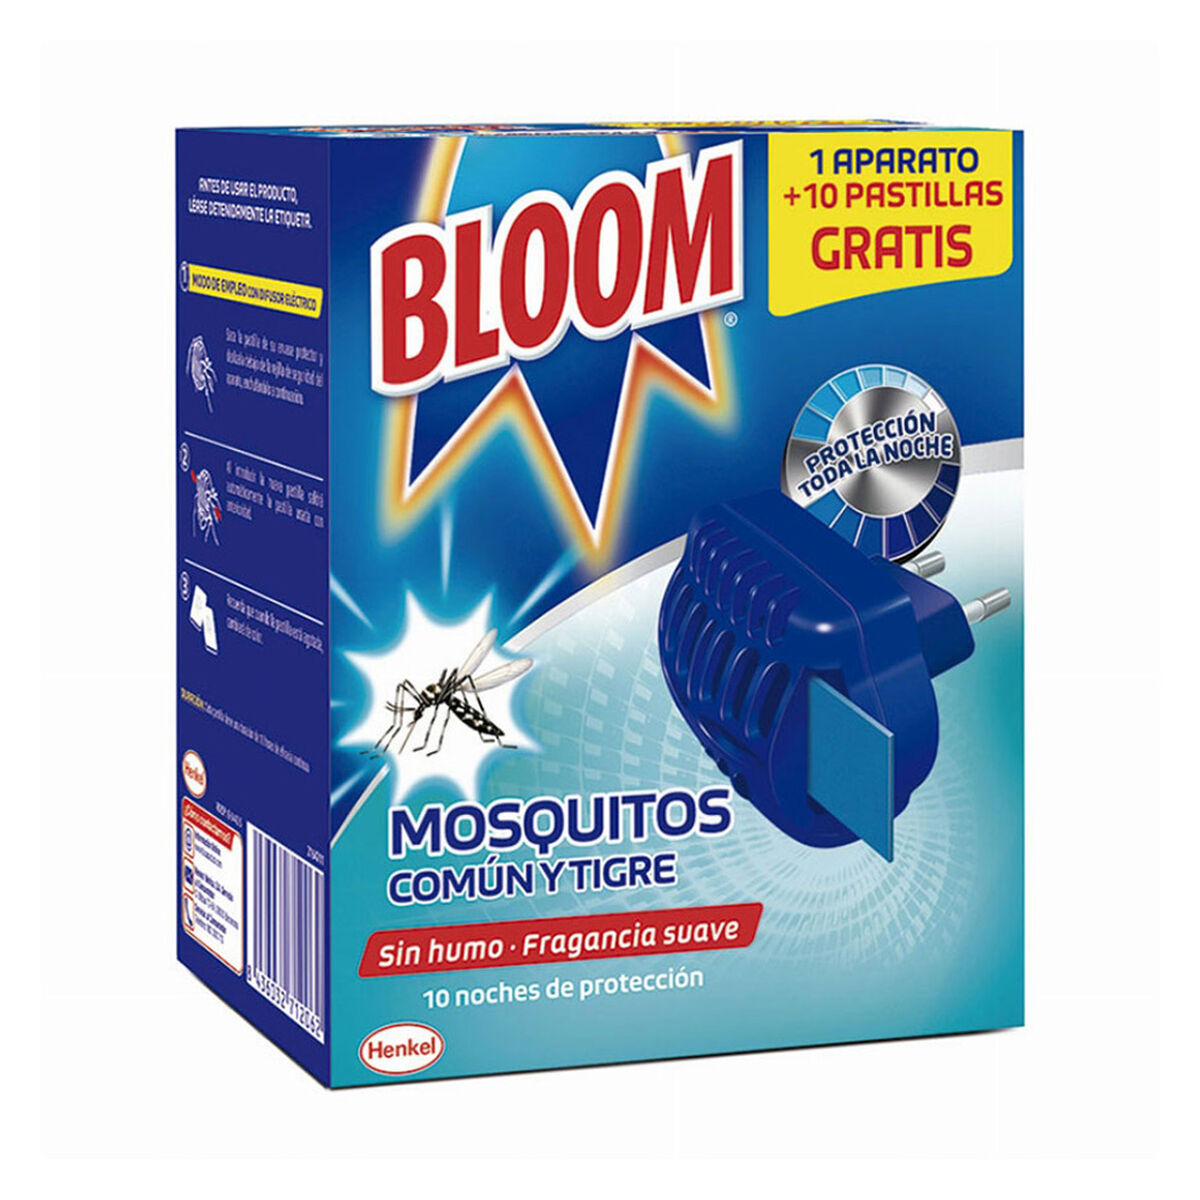 Insecticde Bloom